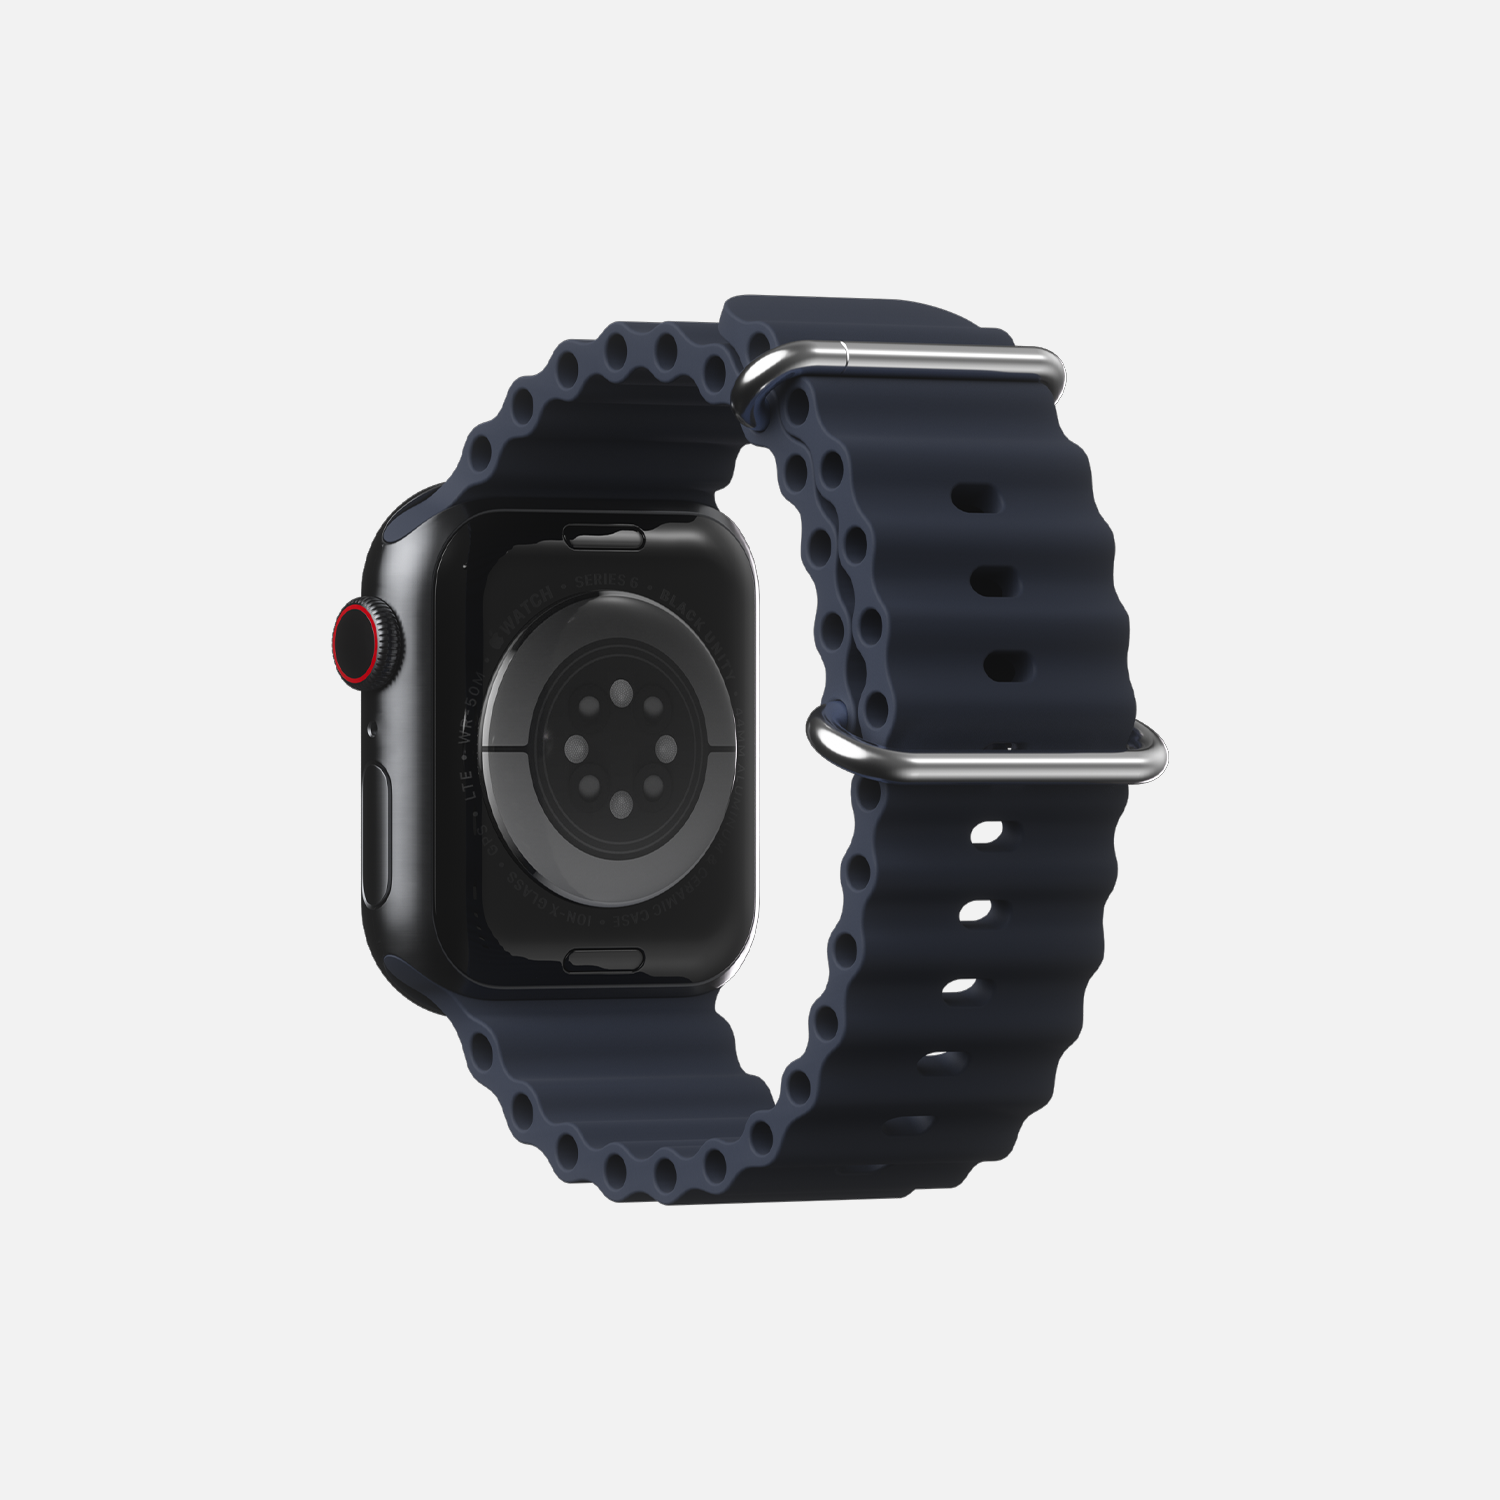 Rear view of a smartwatch for Apple watch with black sports band and red digital crown, isolated on white background.